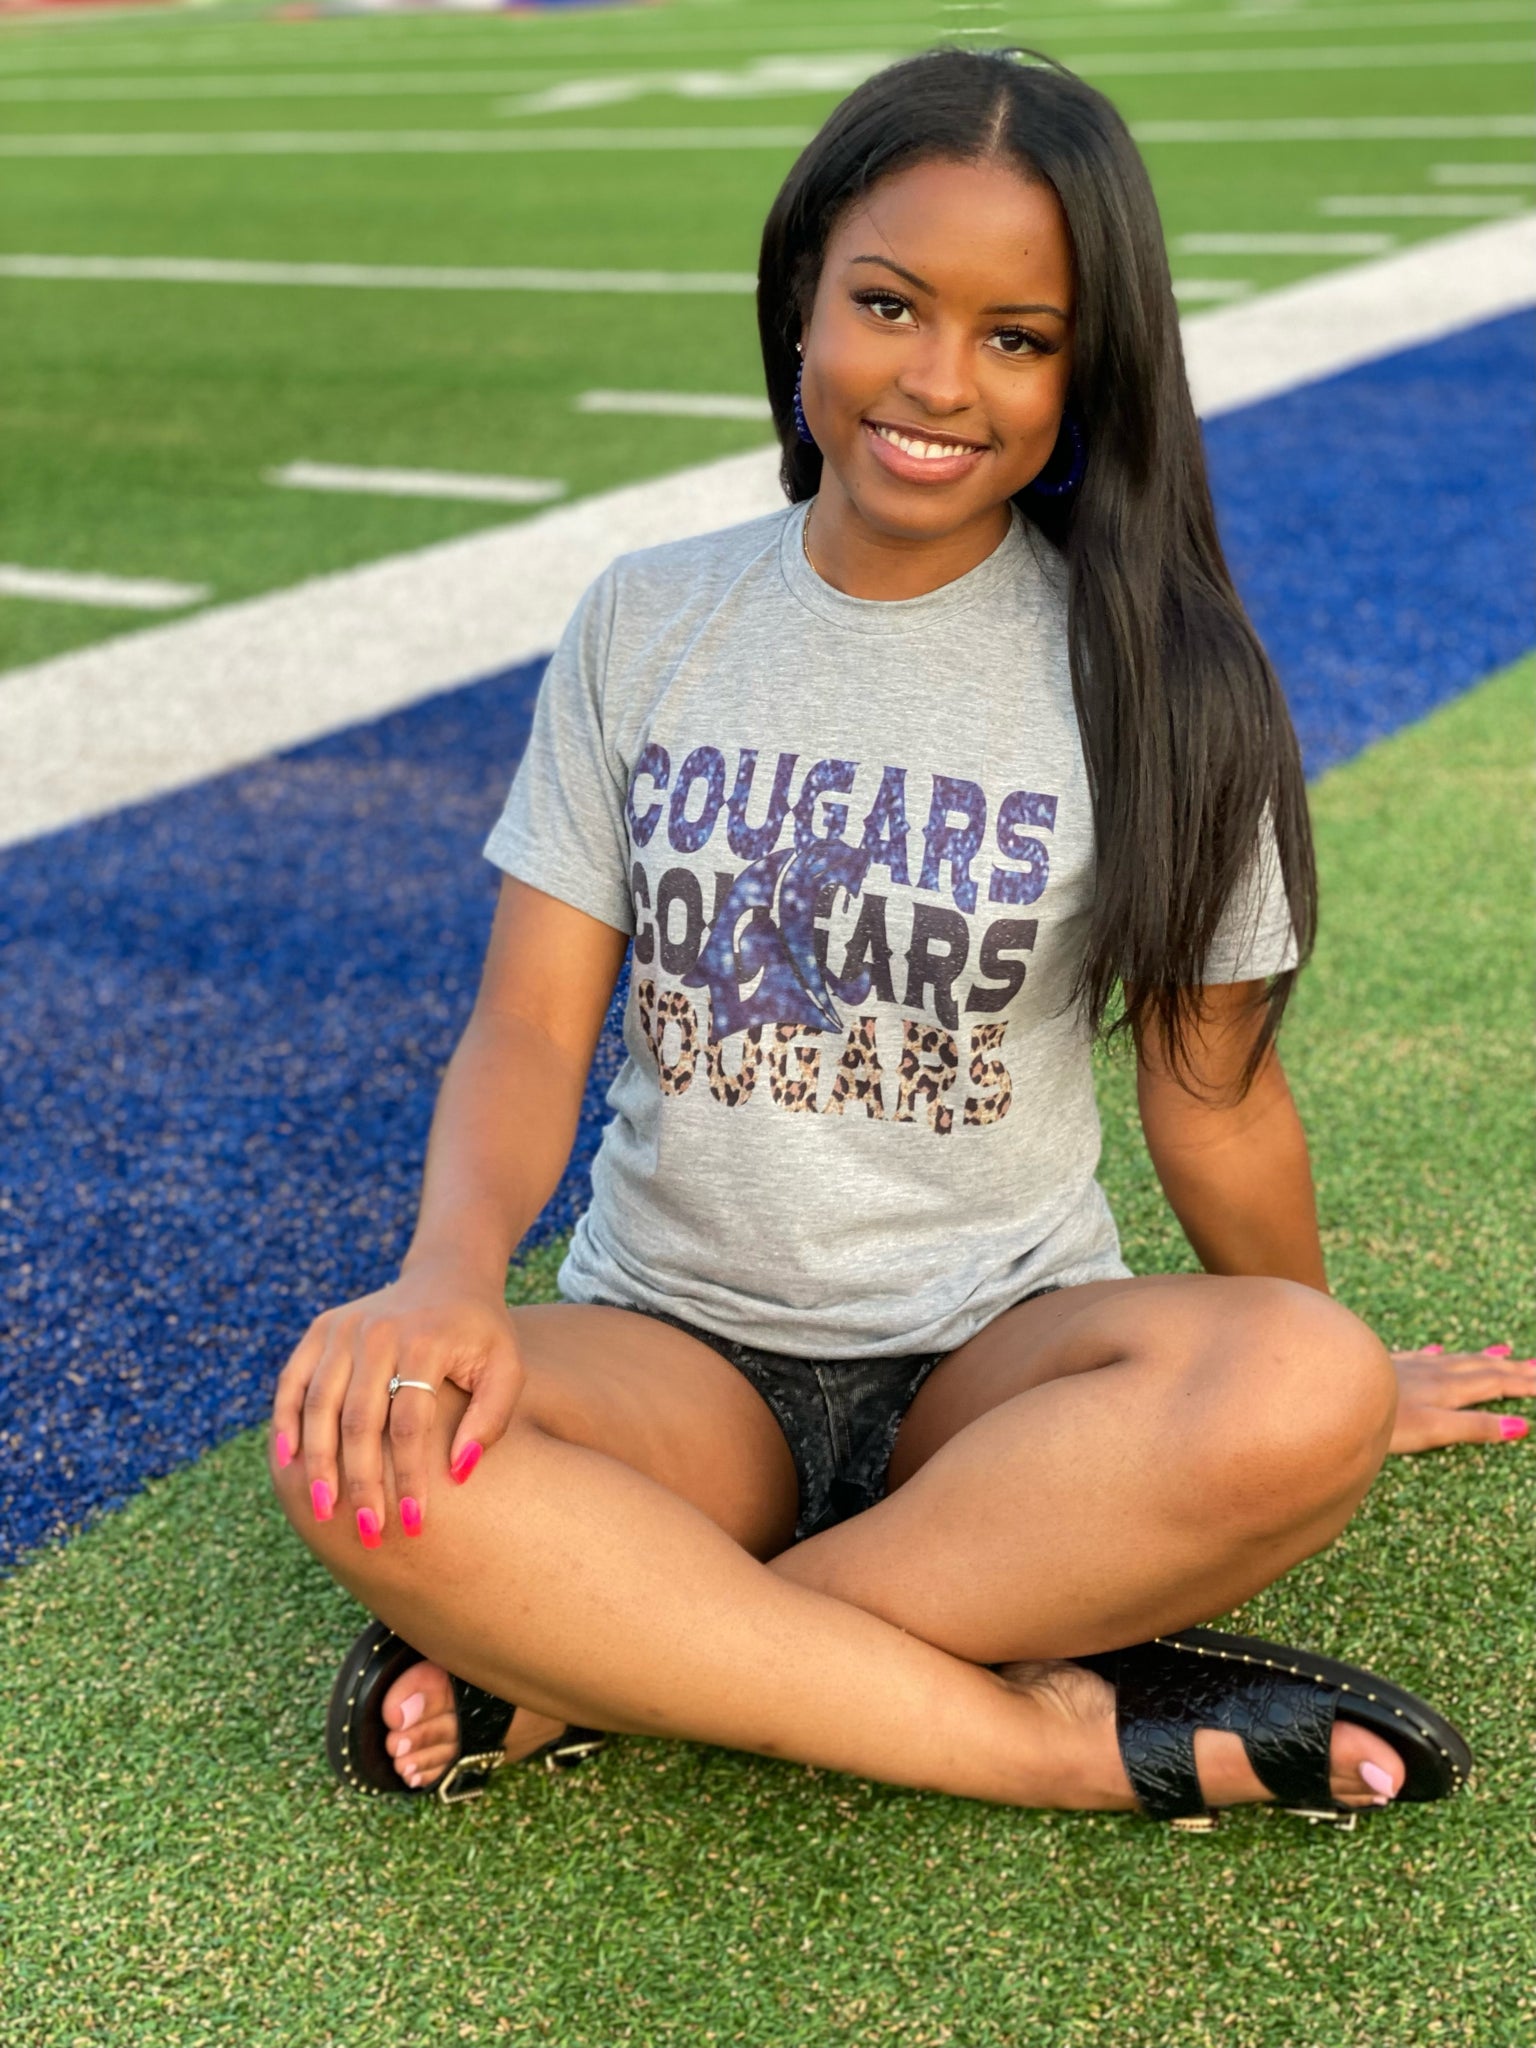 Cougars Cougars Cougar Sublimation Tee